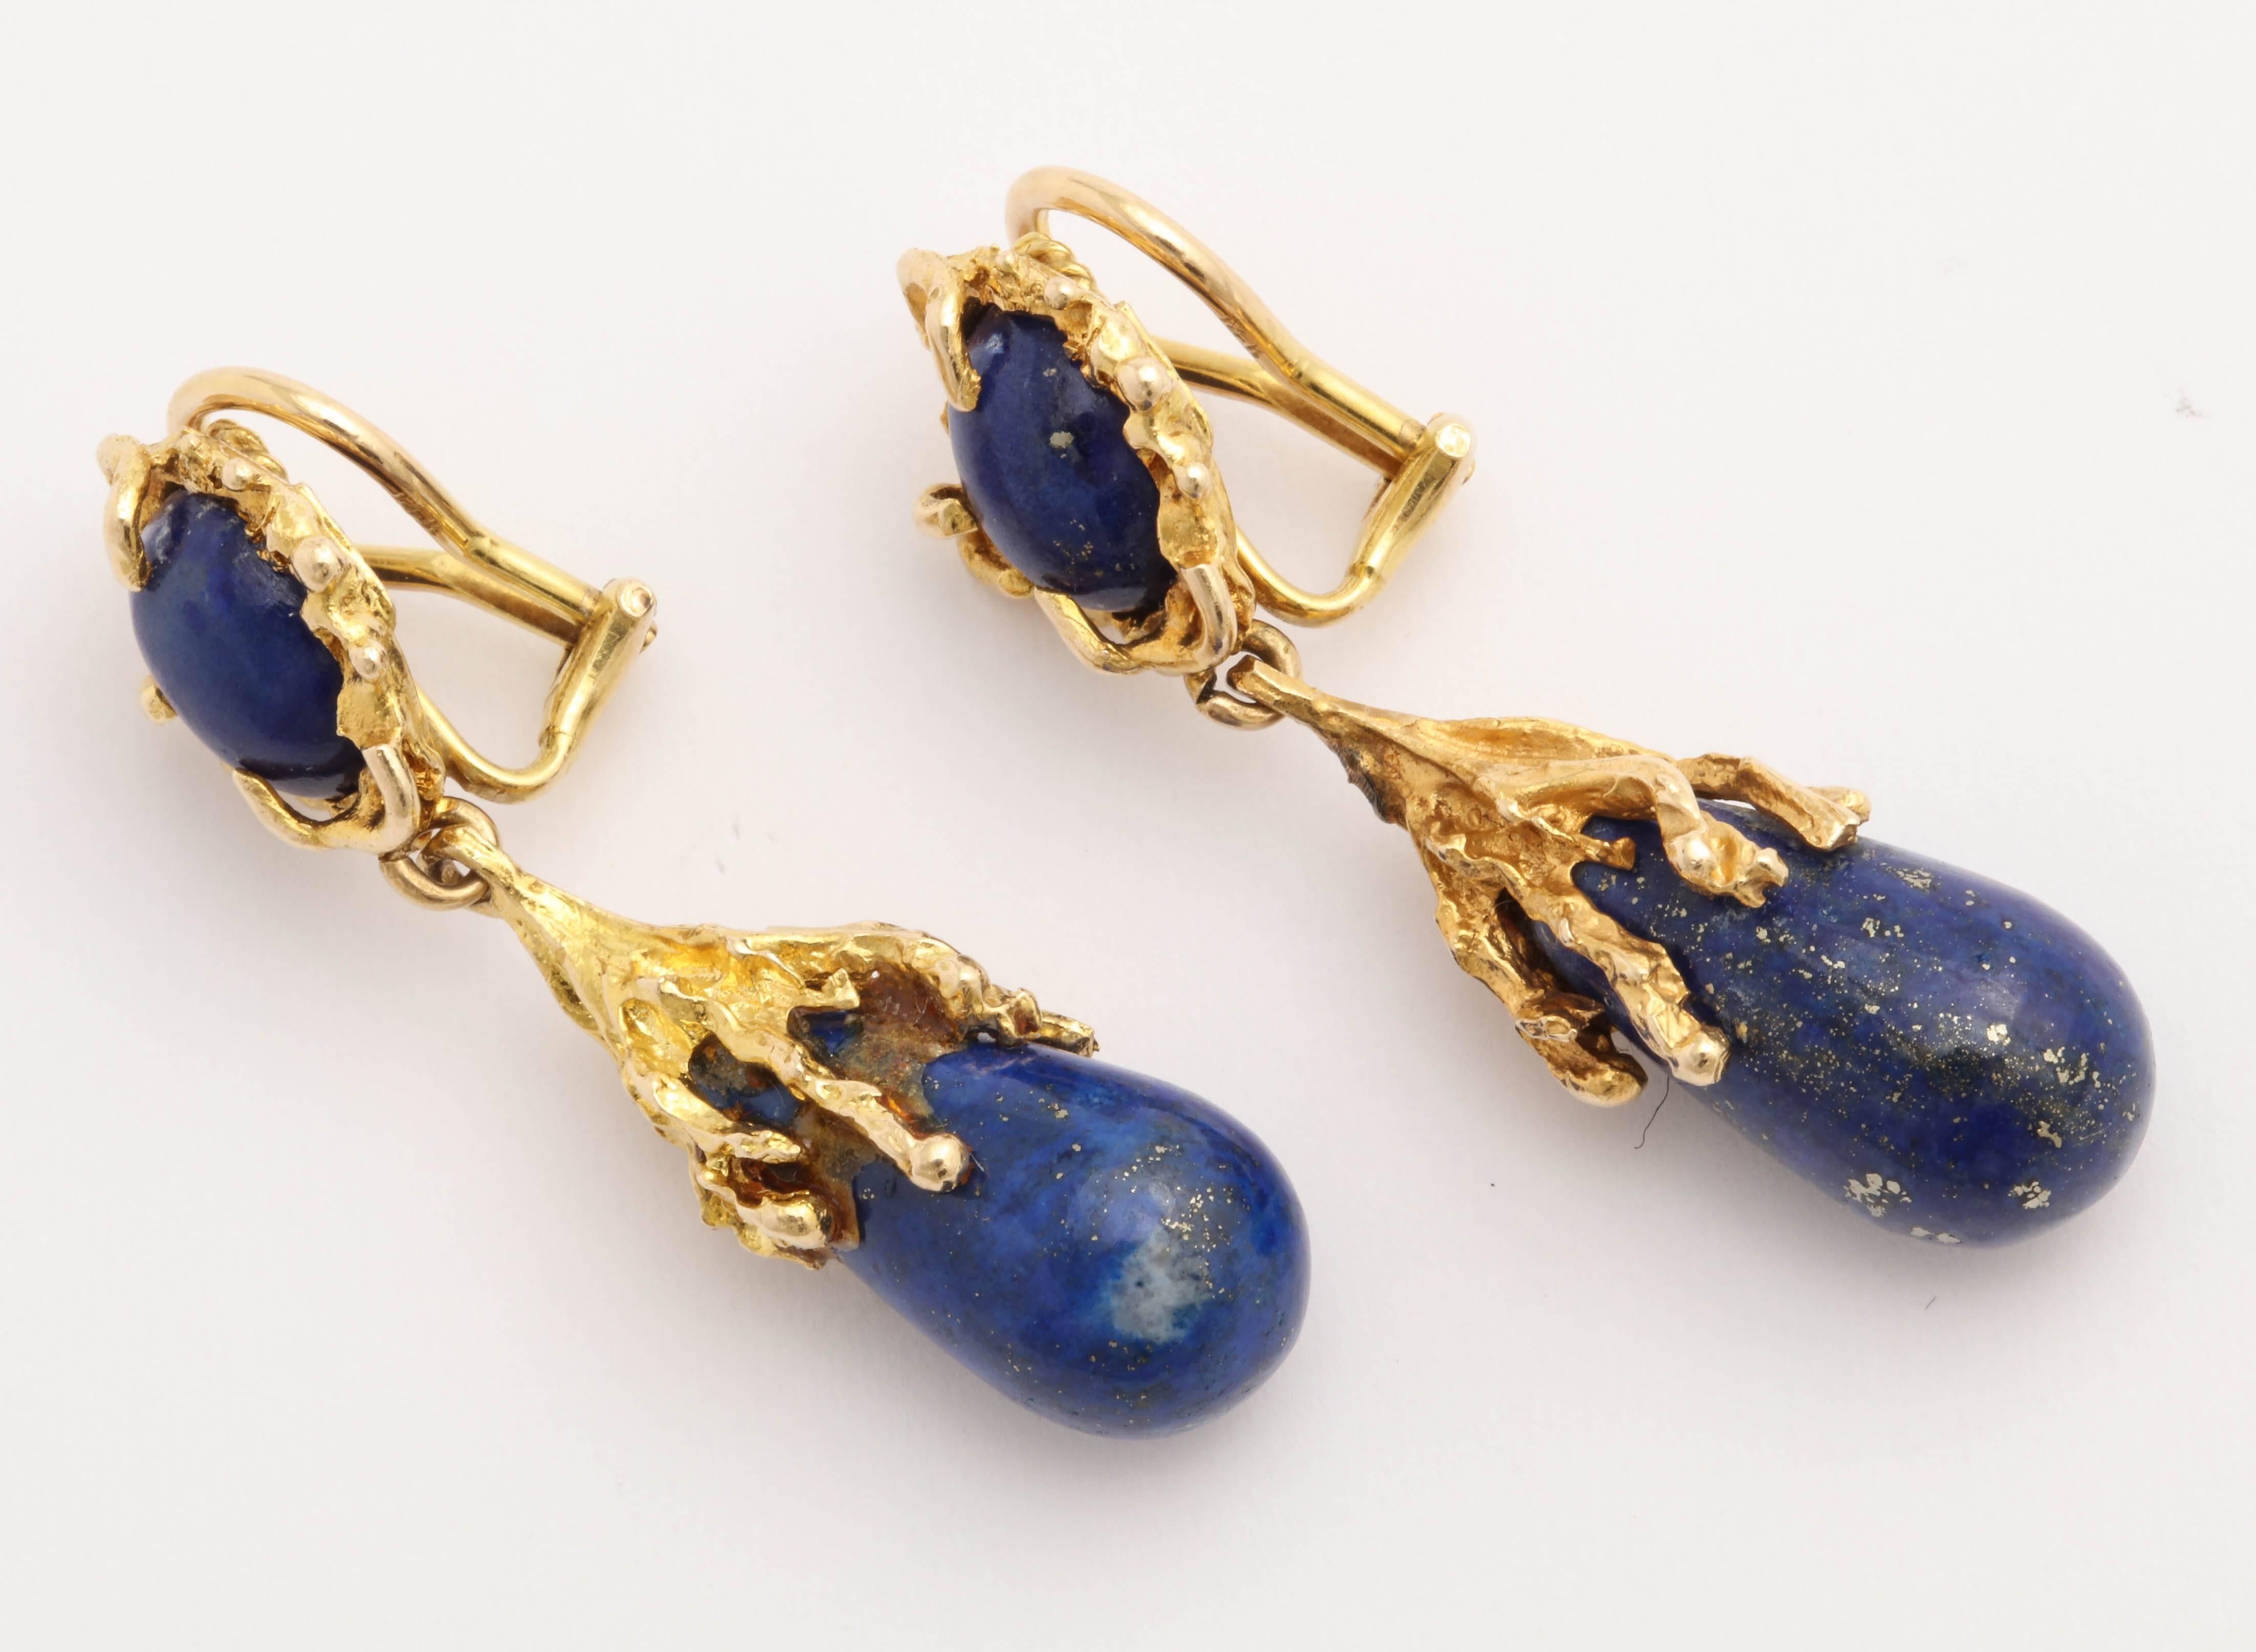 Pair of 14kt Yellow Gold Pendant Earrings with Omega Backs.  Can easily be converted to posts. A great look.
Tops are set with cabochon Lapis ovals  in twisted organic twig-like shapes. Pendants are polished ovoid drops.  Very rich and  super cool. 